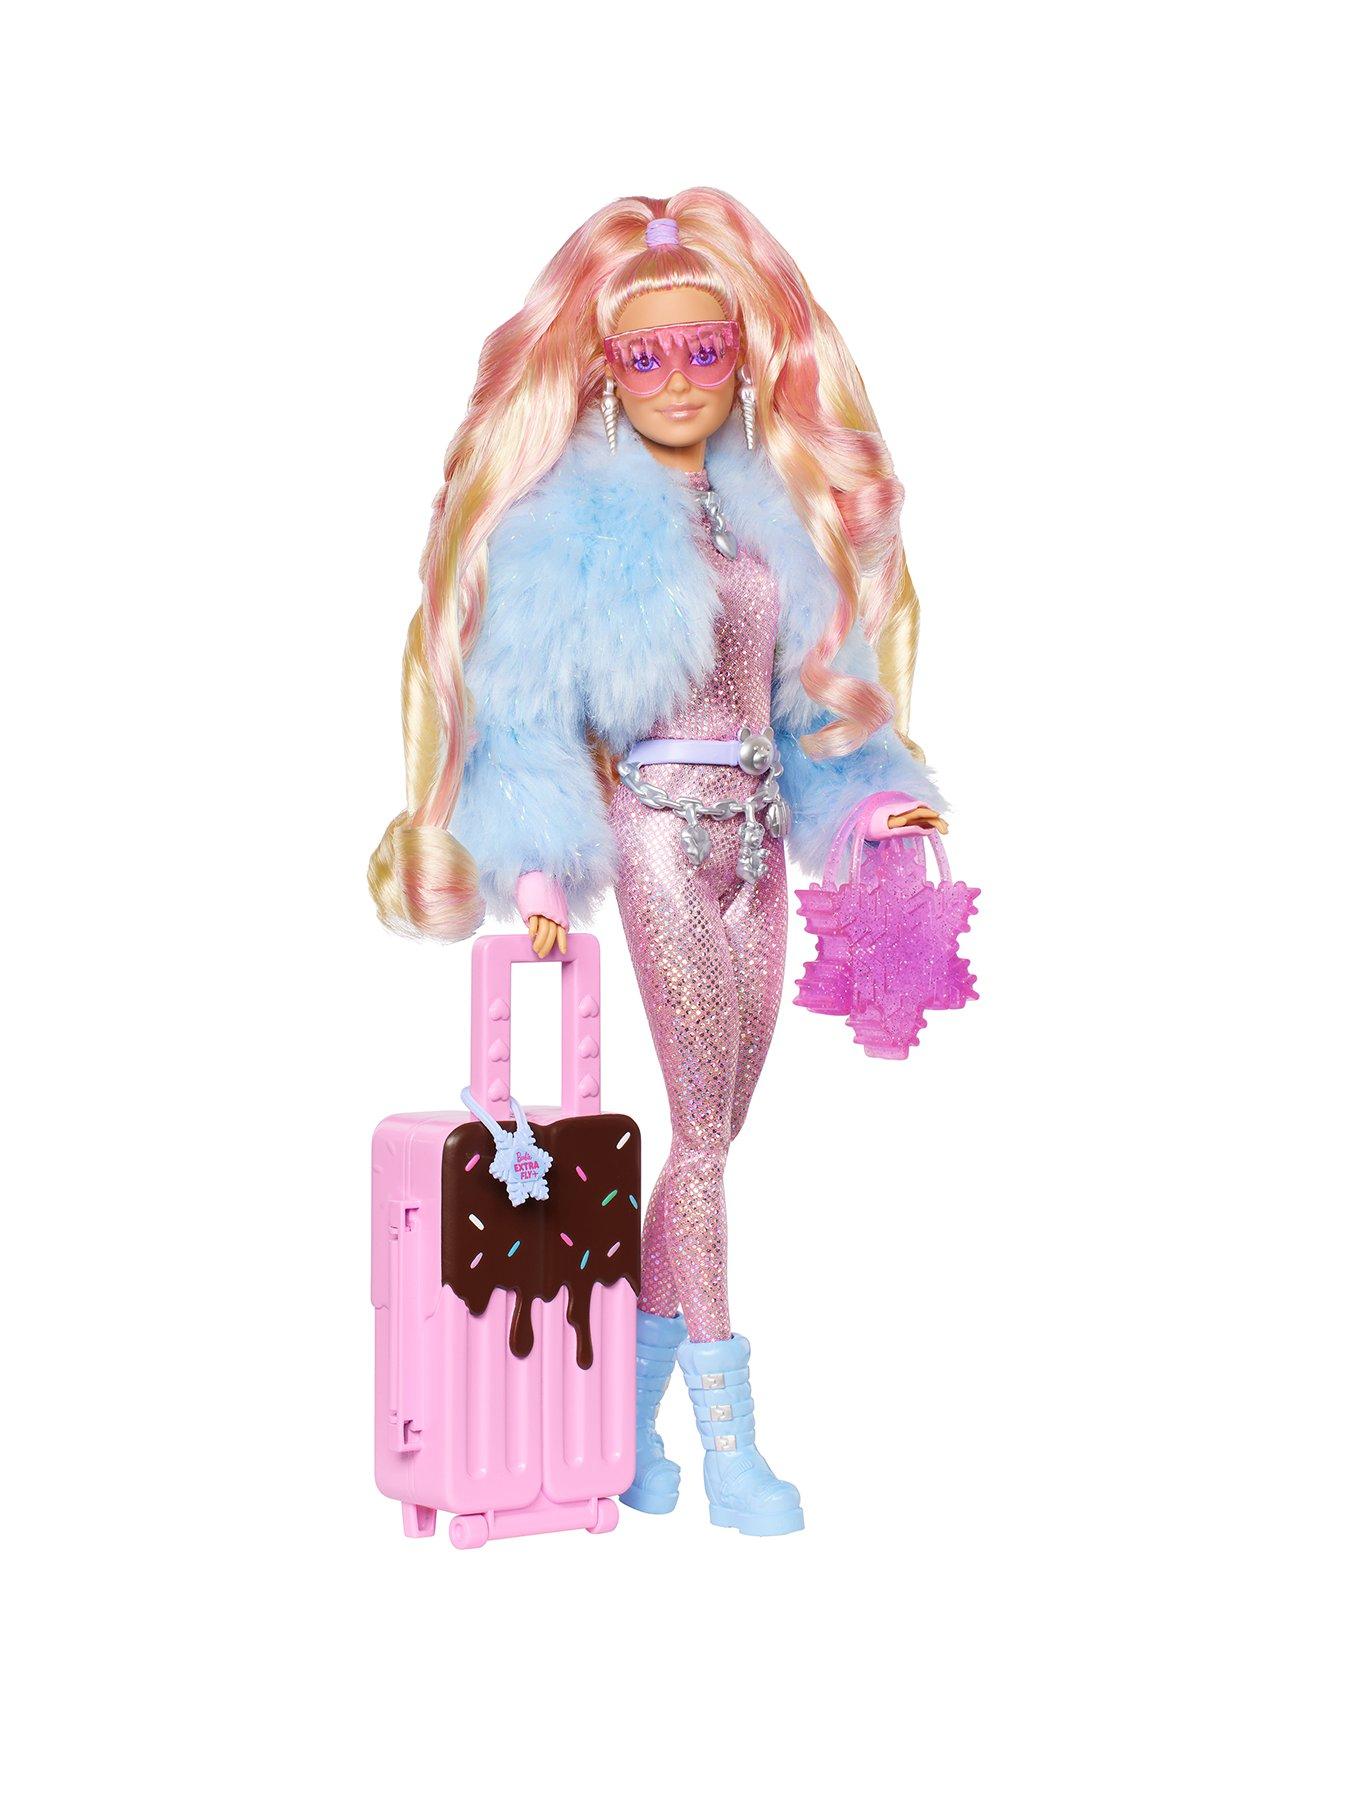 Travel Ken Doll With Beach Fashion, Barbie Extra Fly : Target